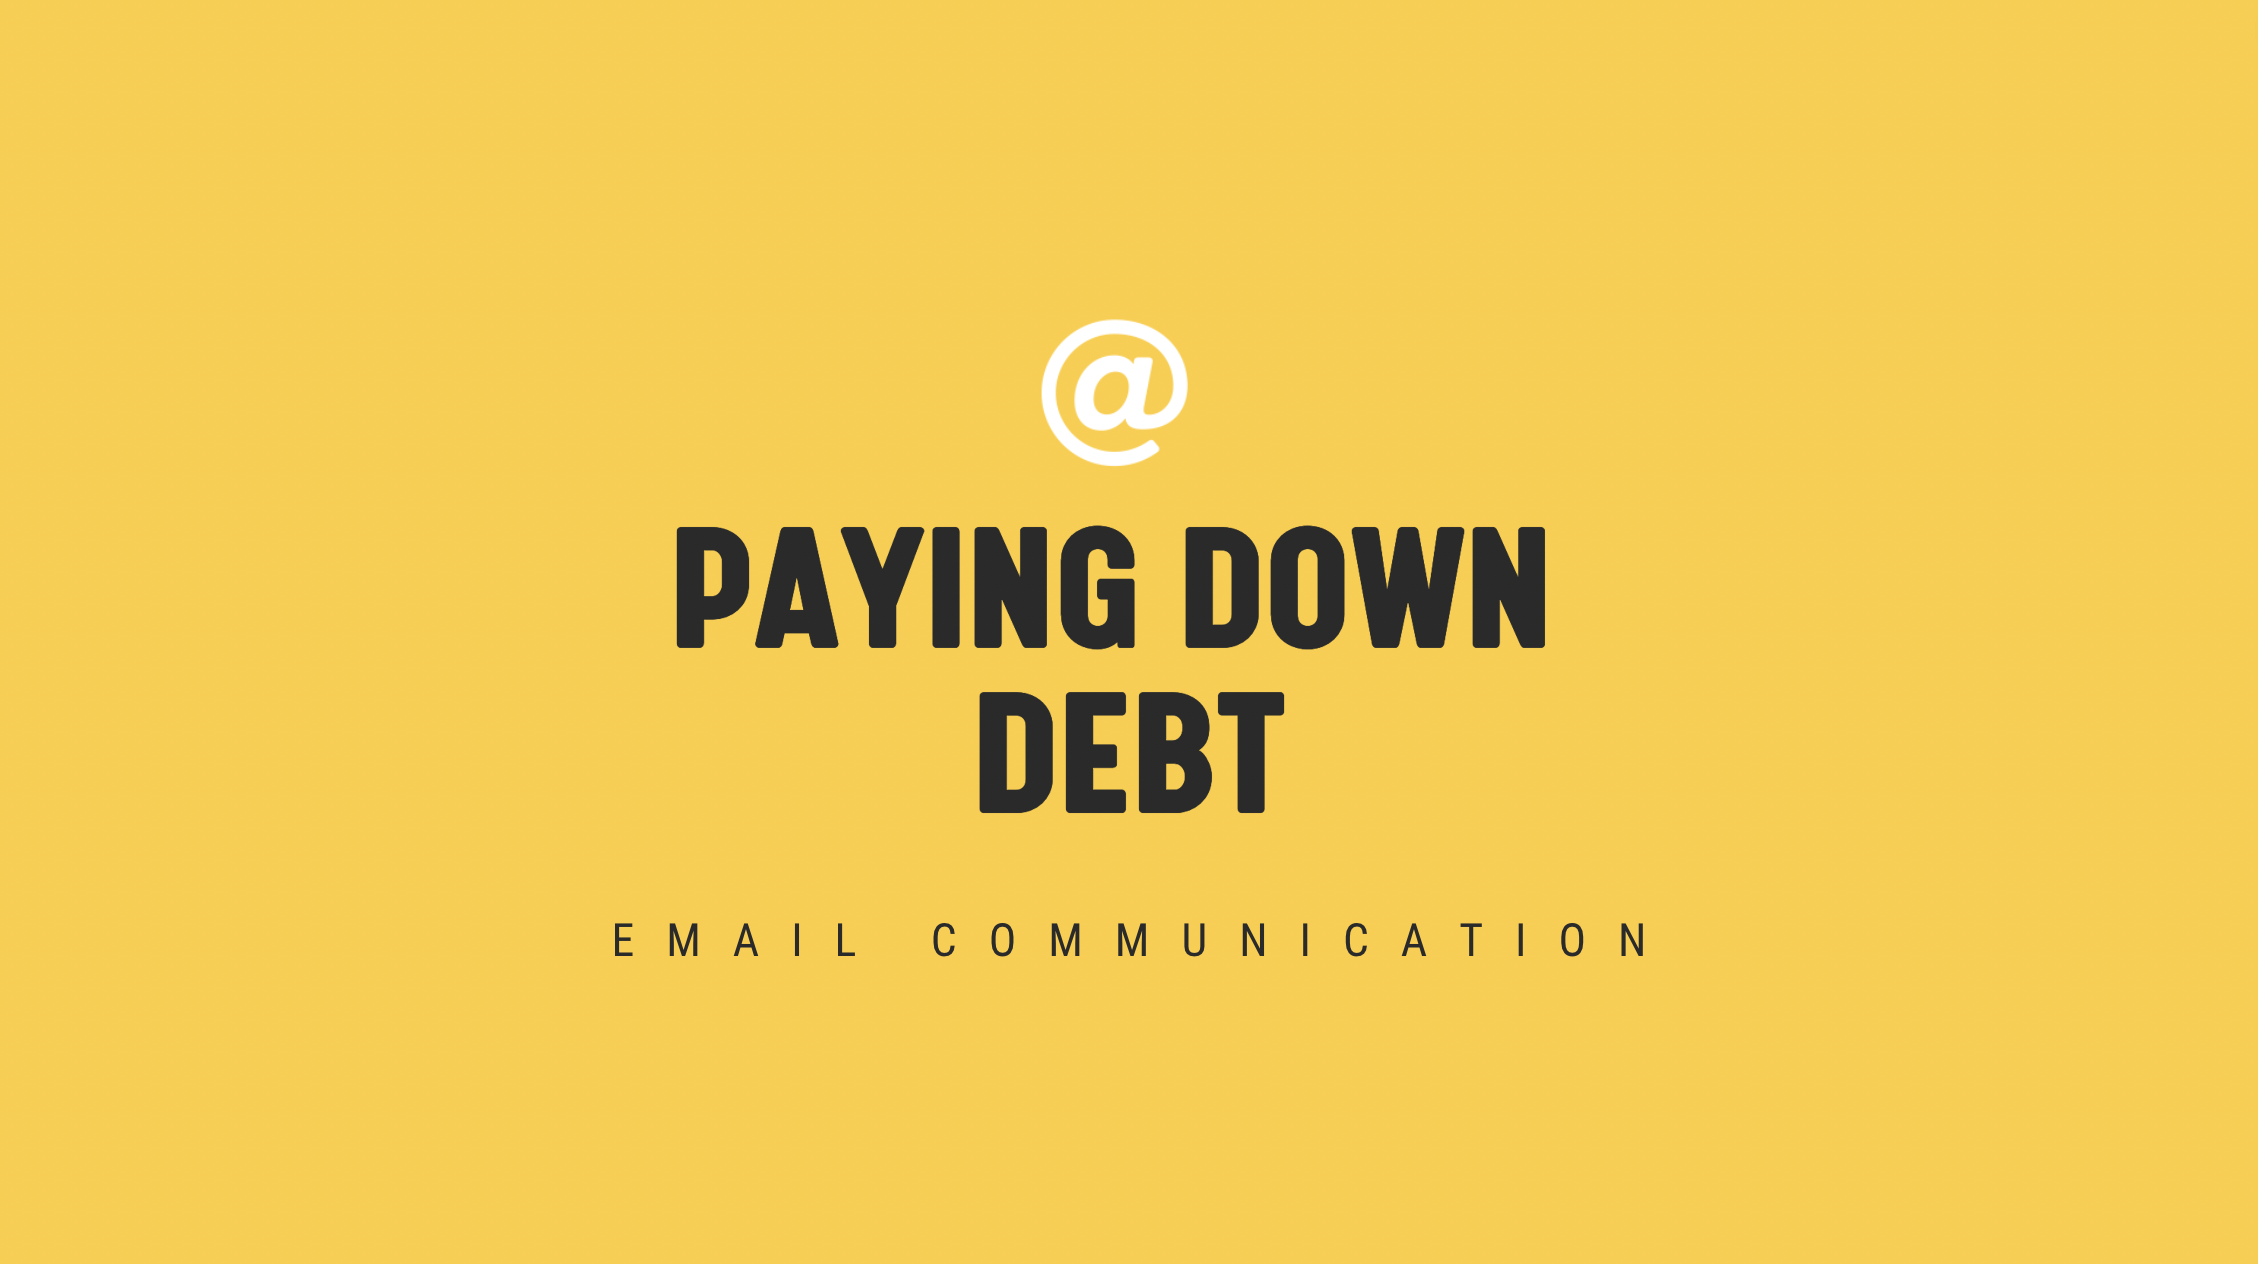 [NEW] Paying Down Debt - Single Email